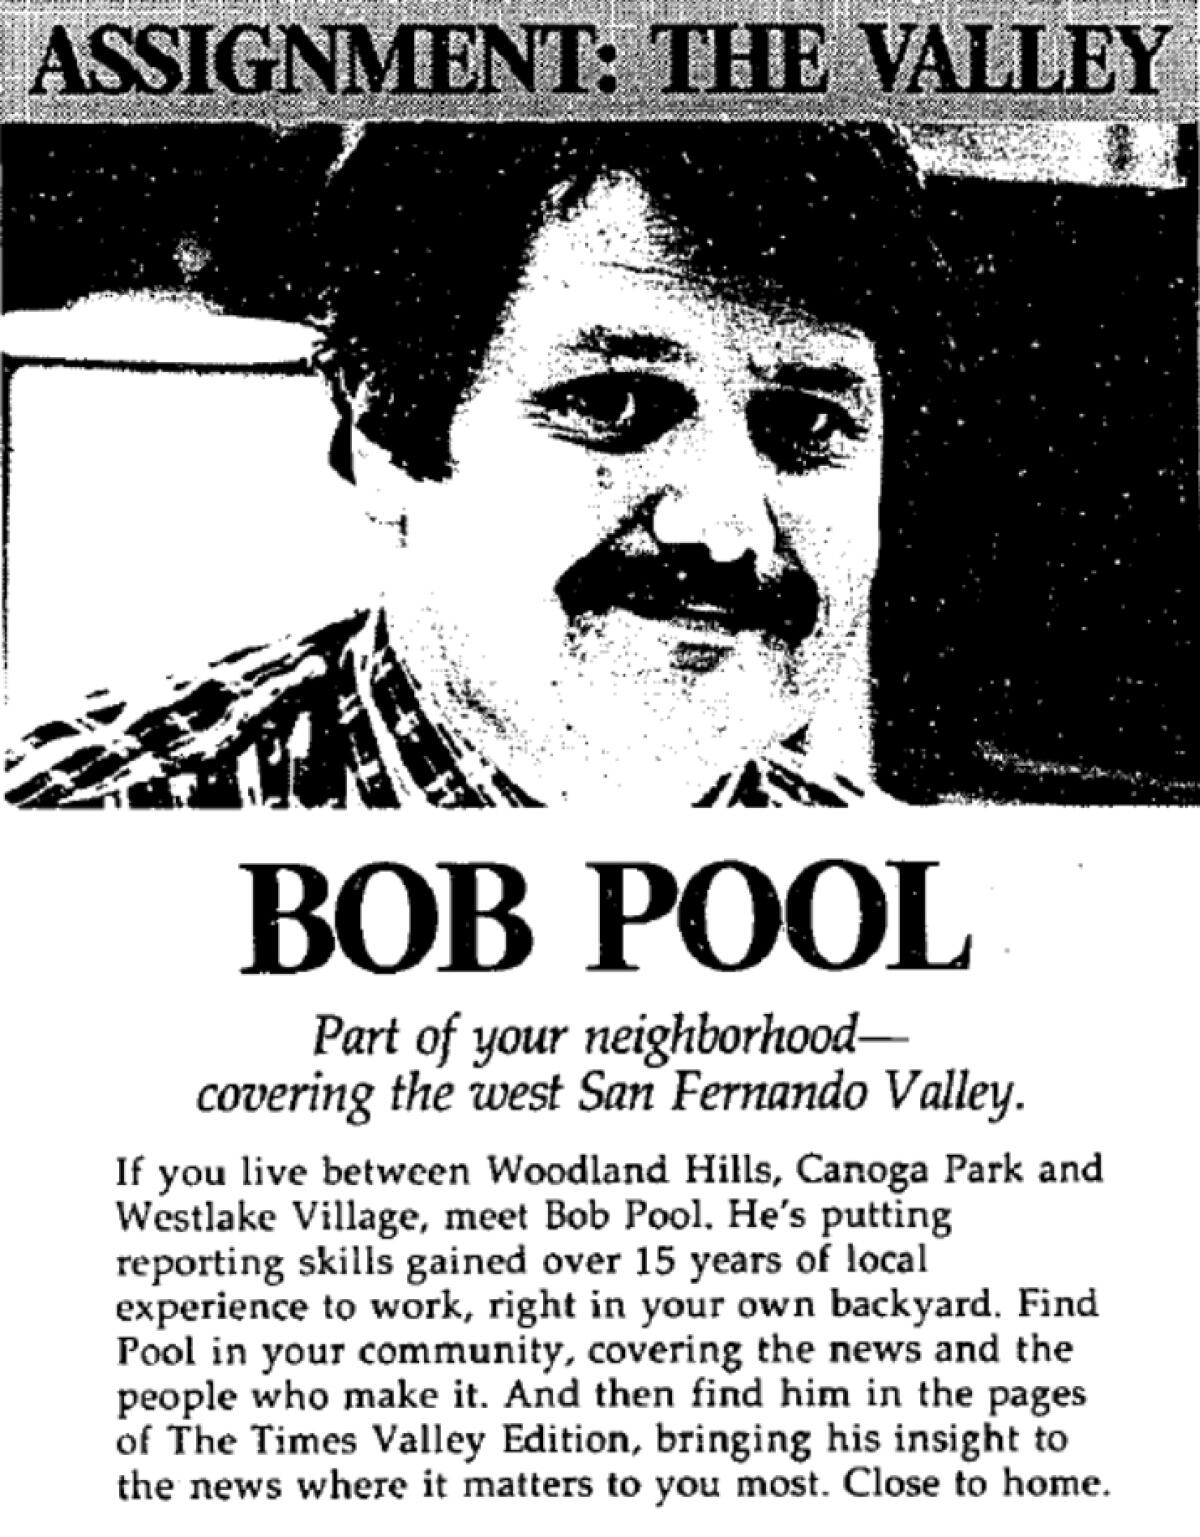 A Los Angeles Times ad featuring Bob Pool when he was a reporter in the San Fernando Valley Edition.